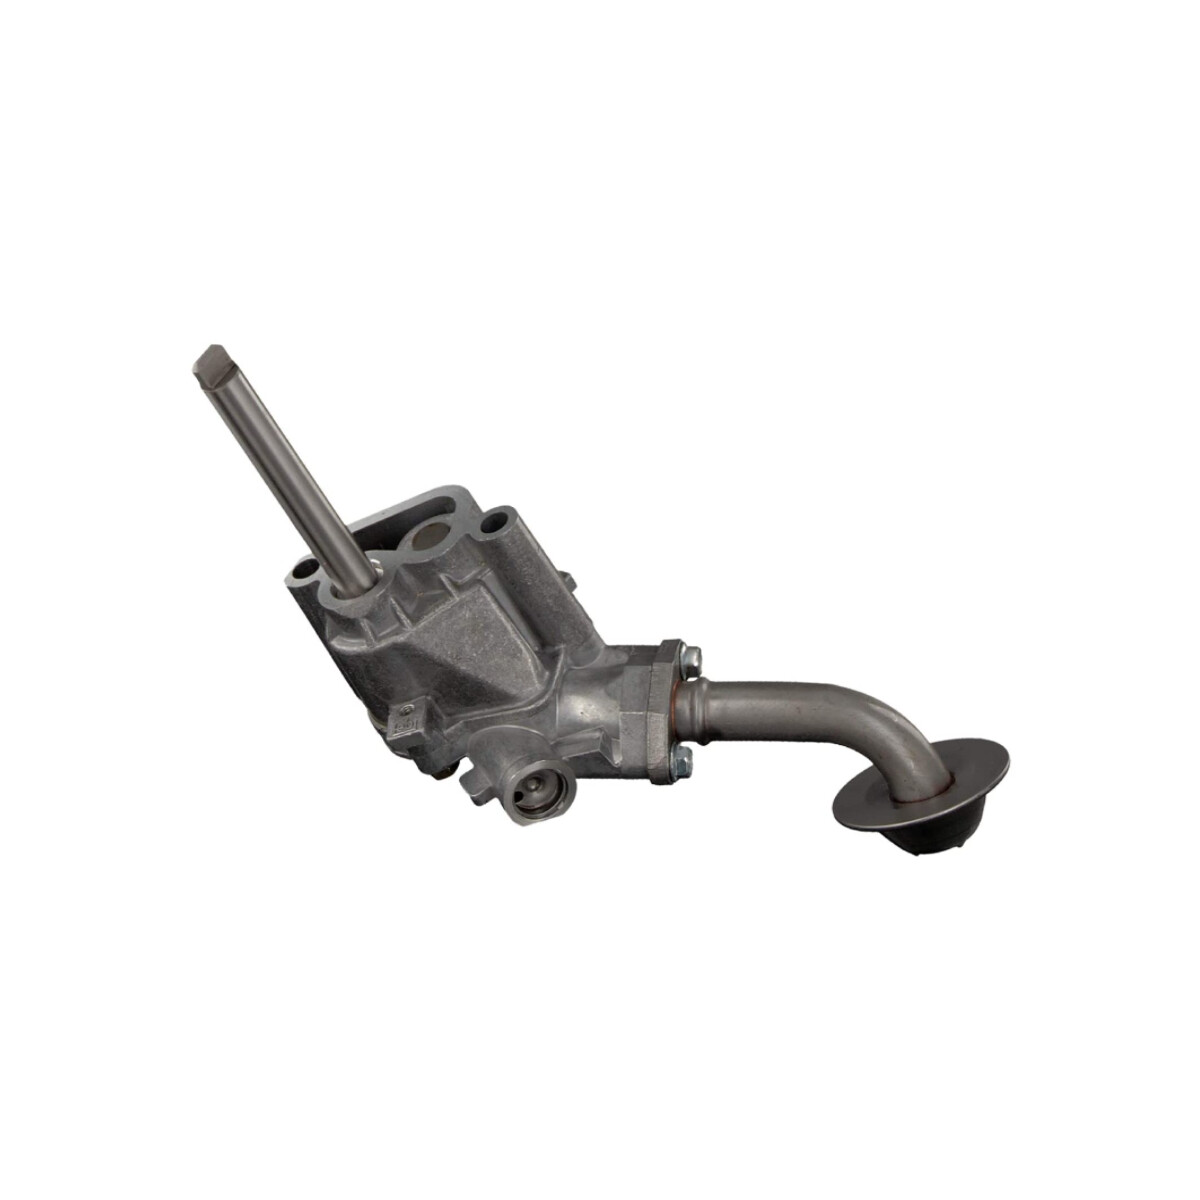 Oil pump for all G60 (PG) and 1H engines